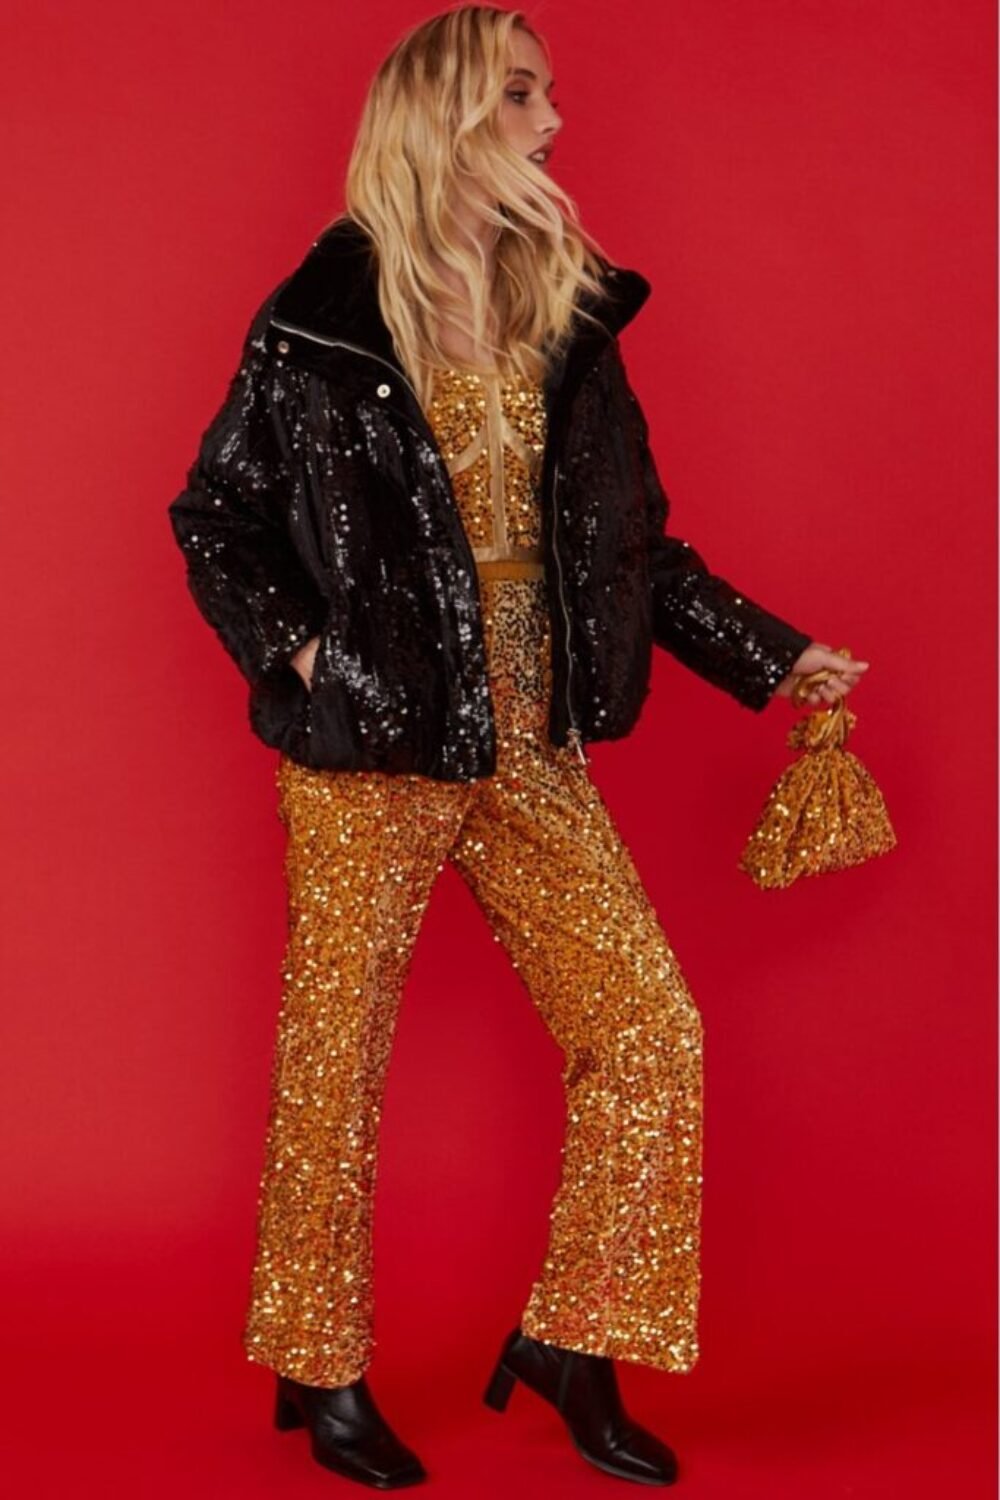 Shop Lux Black Sequin Puffer Jacket and women's luxury and designer clothes at www.lux-apparel.co.uk